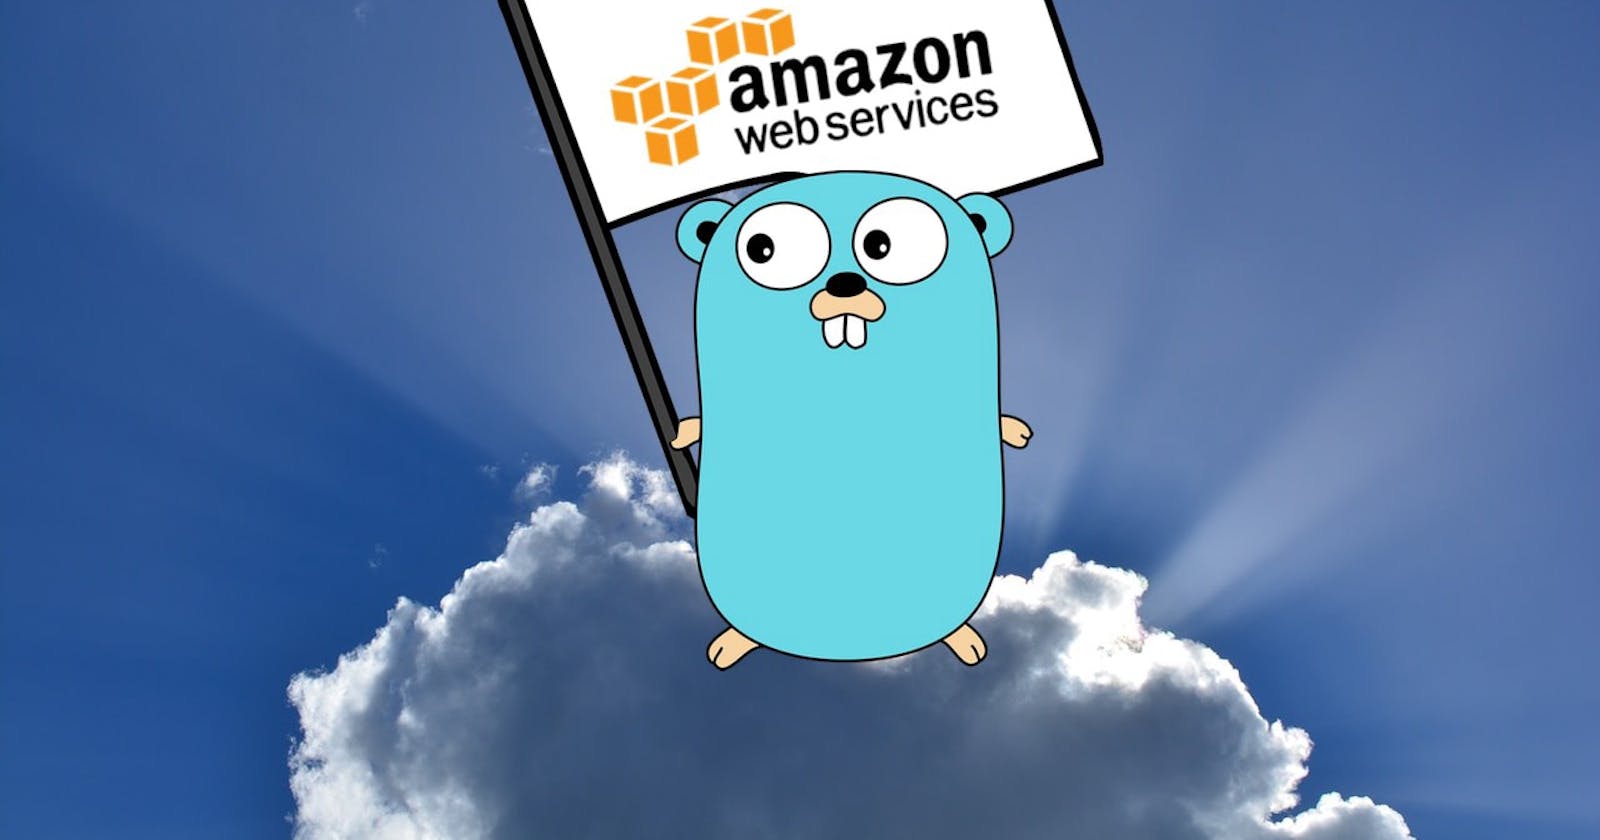 Upload images to AWS S3 bucket in a golang web application